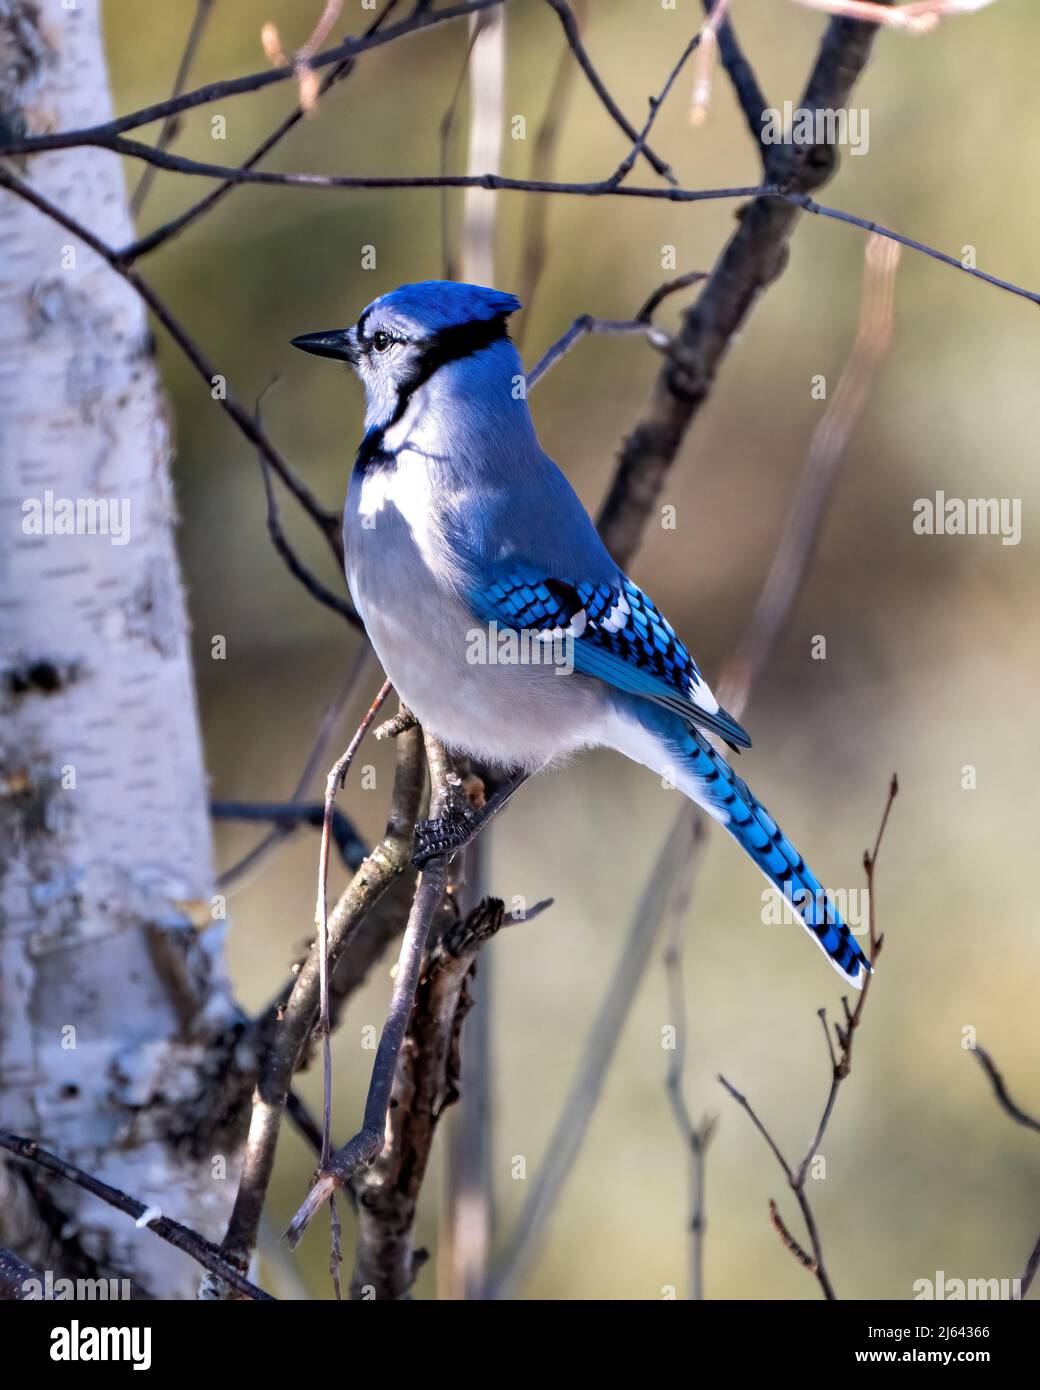 Blue Jay bird close-up perched on a birch tree branch with a blur forest background in the forest environment and habitat displaying blue plumage. Stock Photo